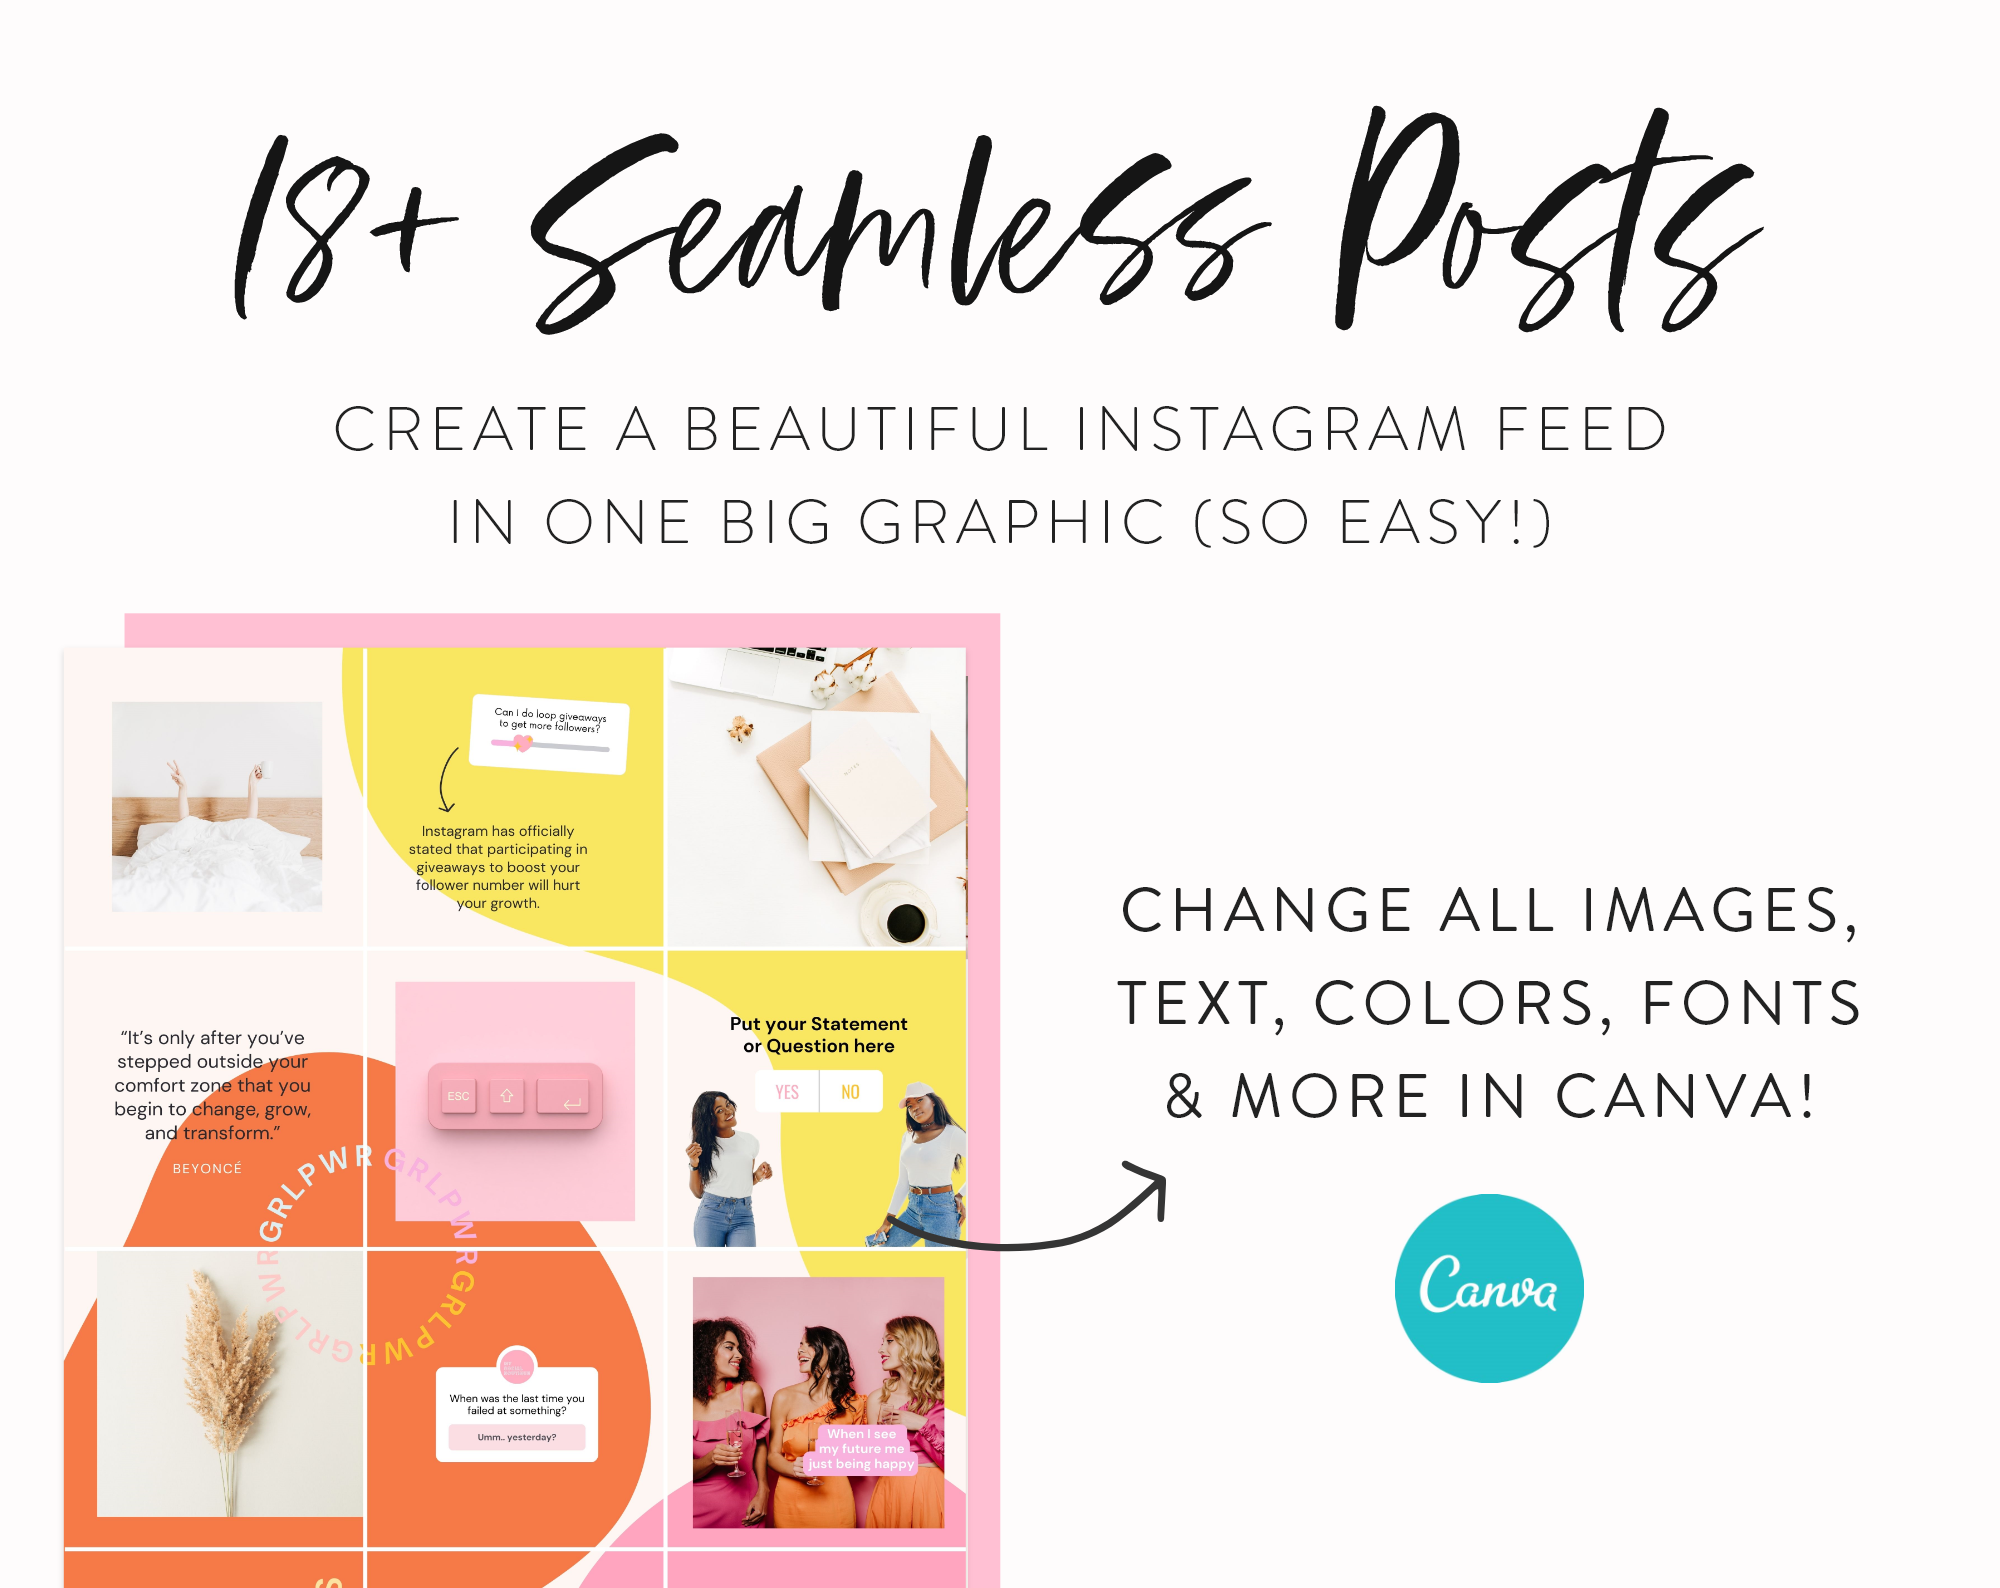 Engagement-power-Instagram-puzzle-for-canva-templates-posts